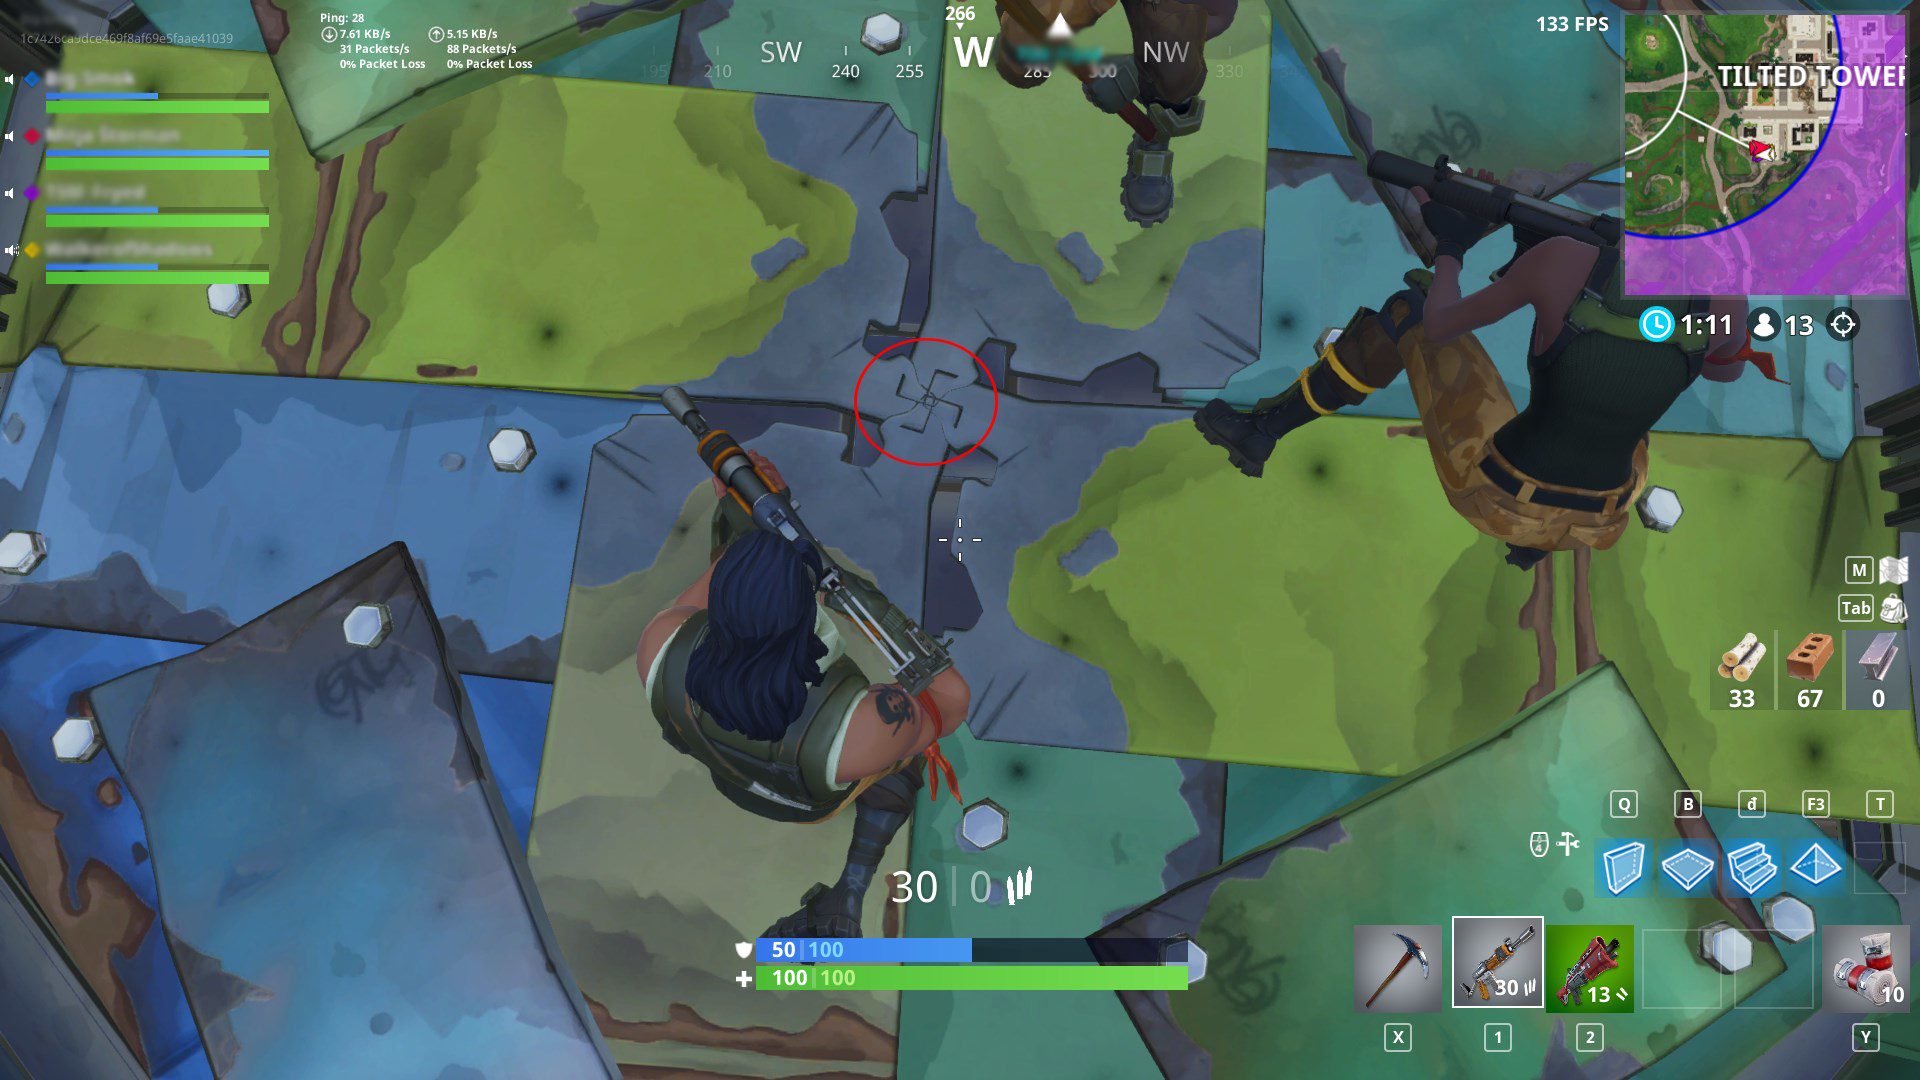 Fortnite Accidentally Includes a Swastika